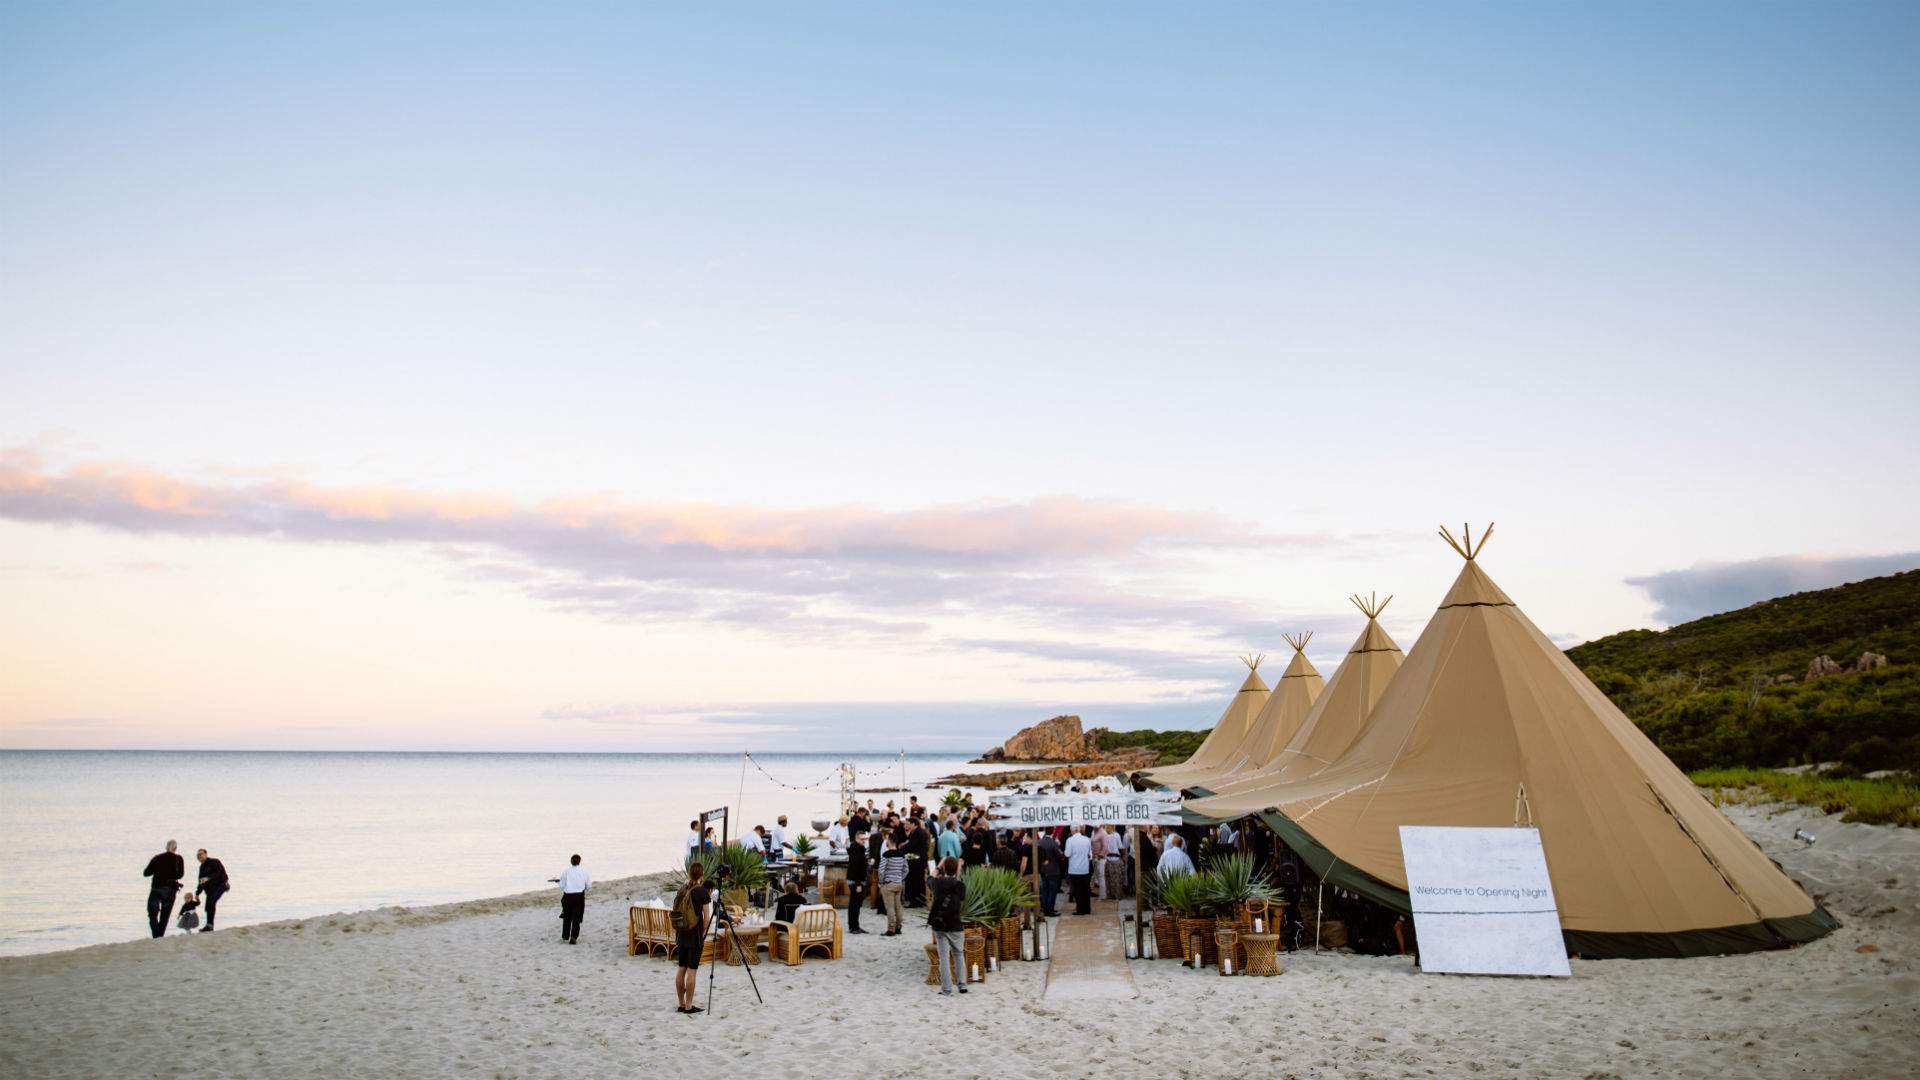 How to Experience the Best of WA's Food and Outdoors at This Sprawling Food and Wine Festival